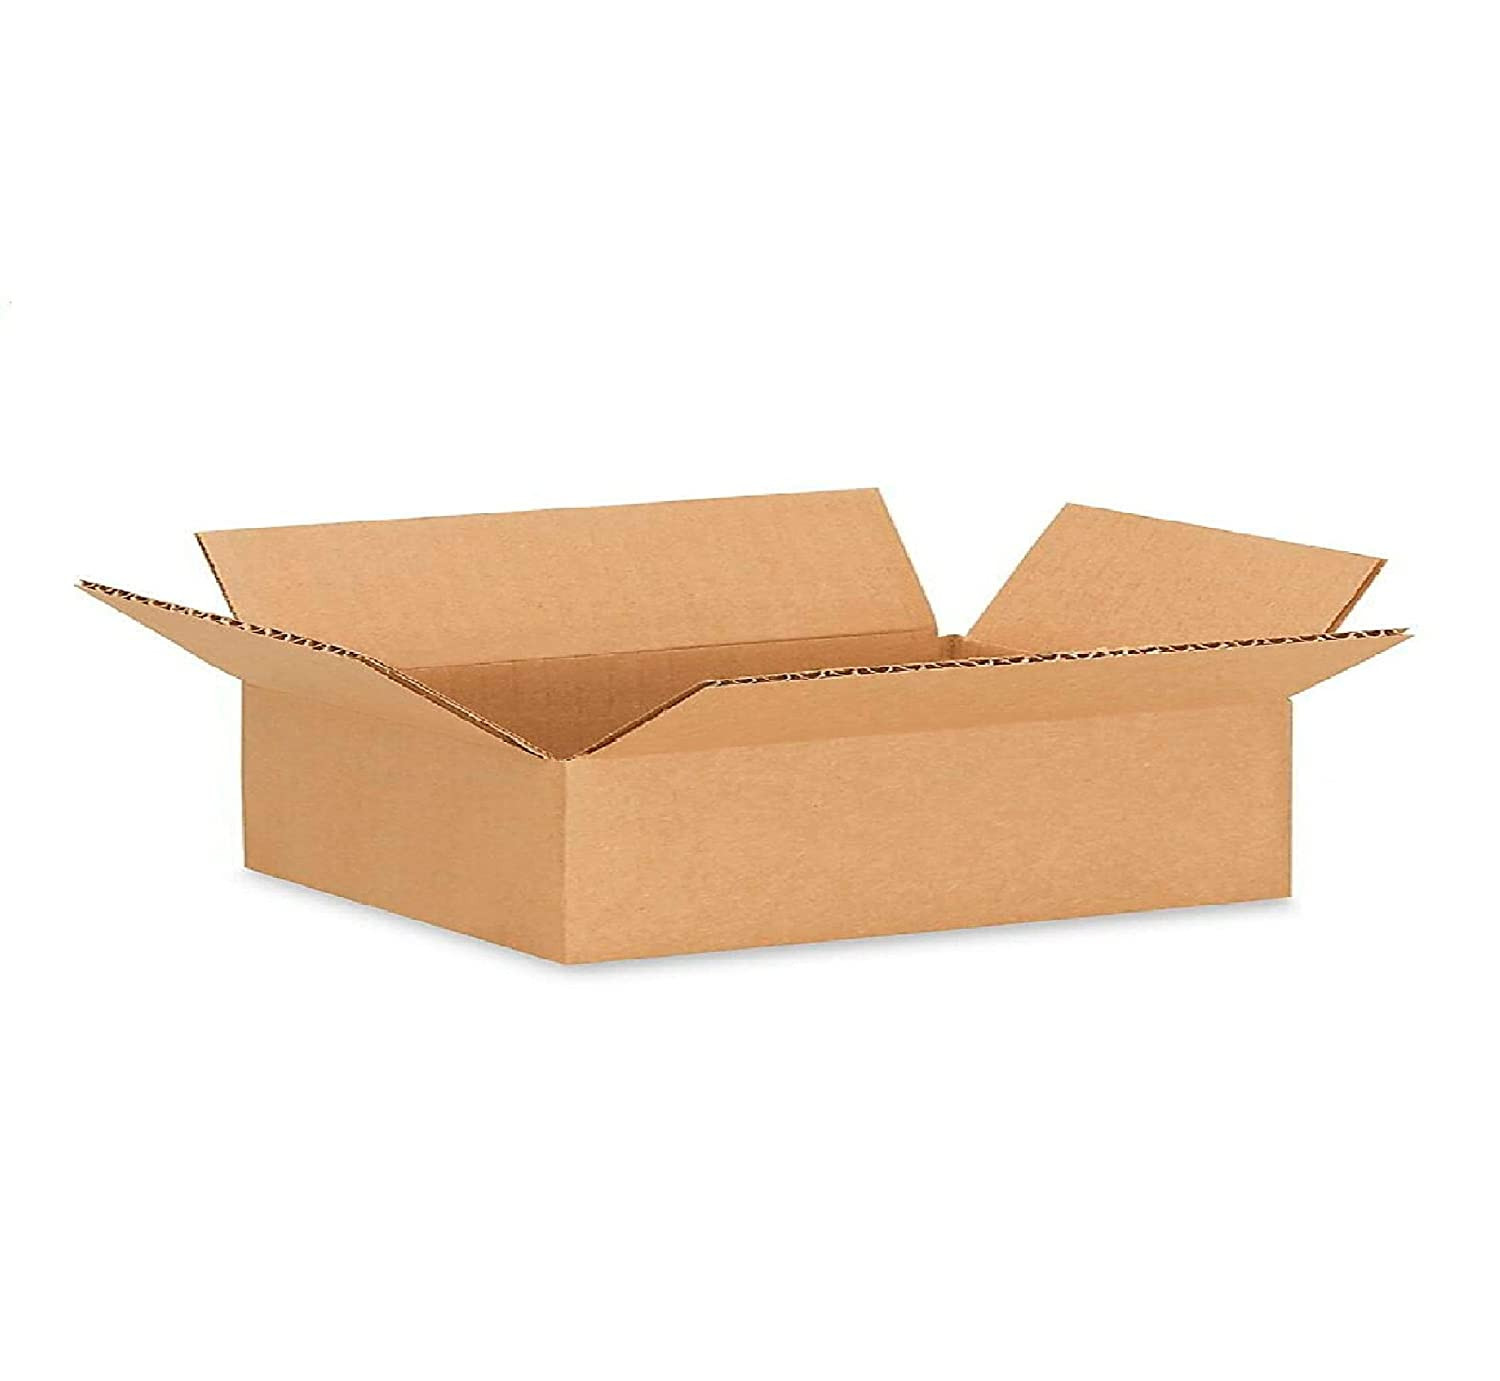 Cube Boxes In USA, Cheap Moving Boxes